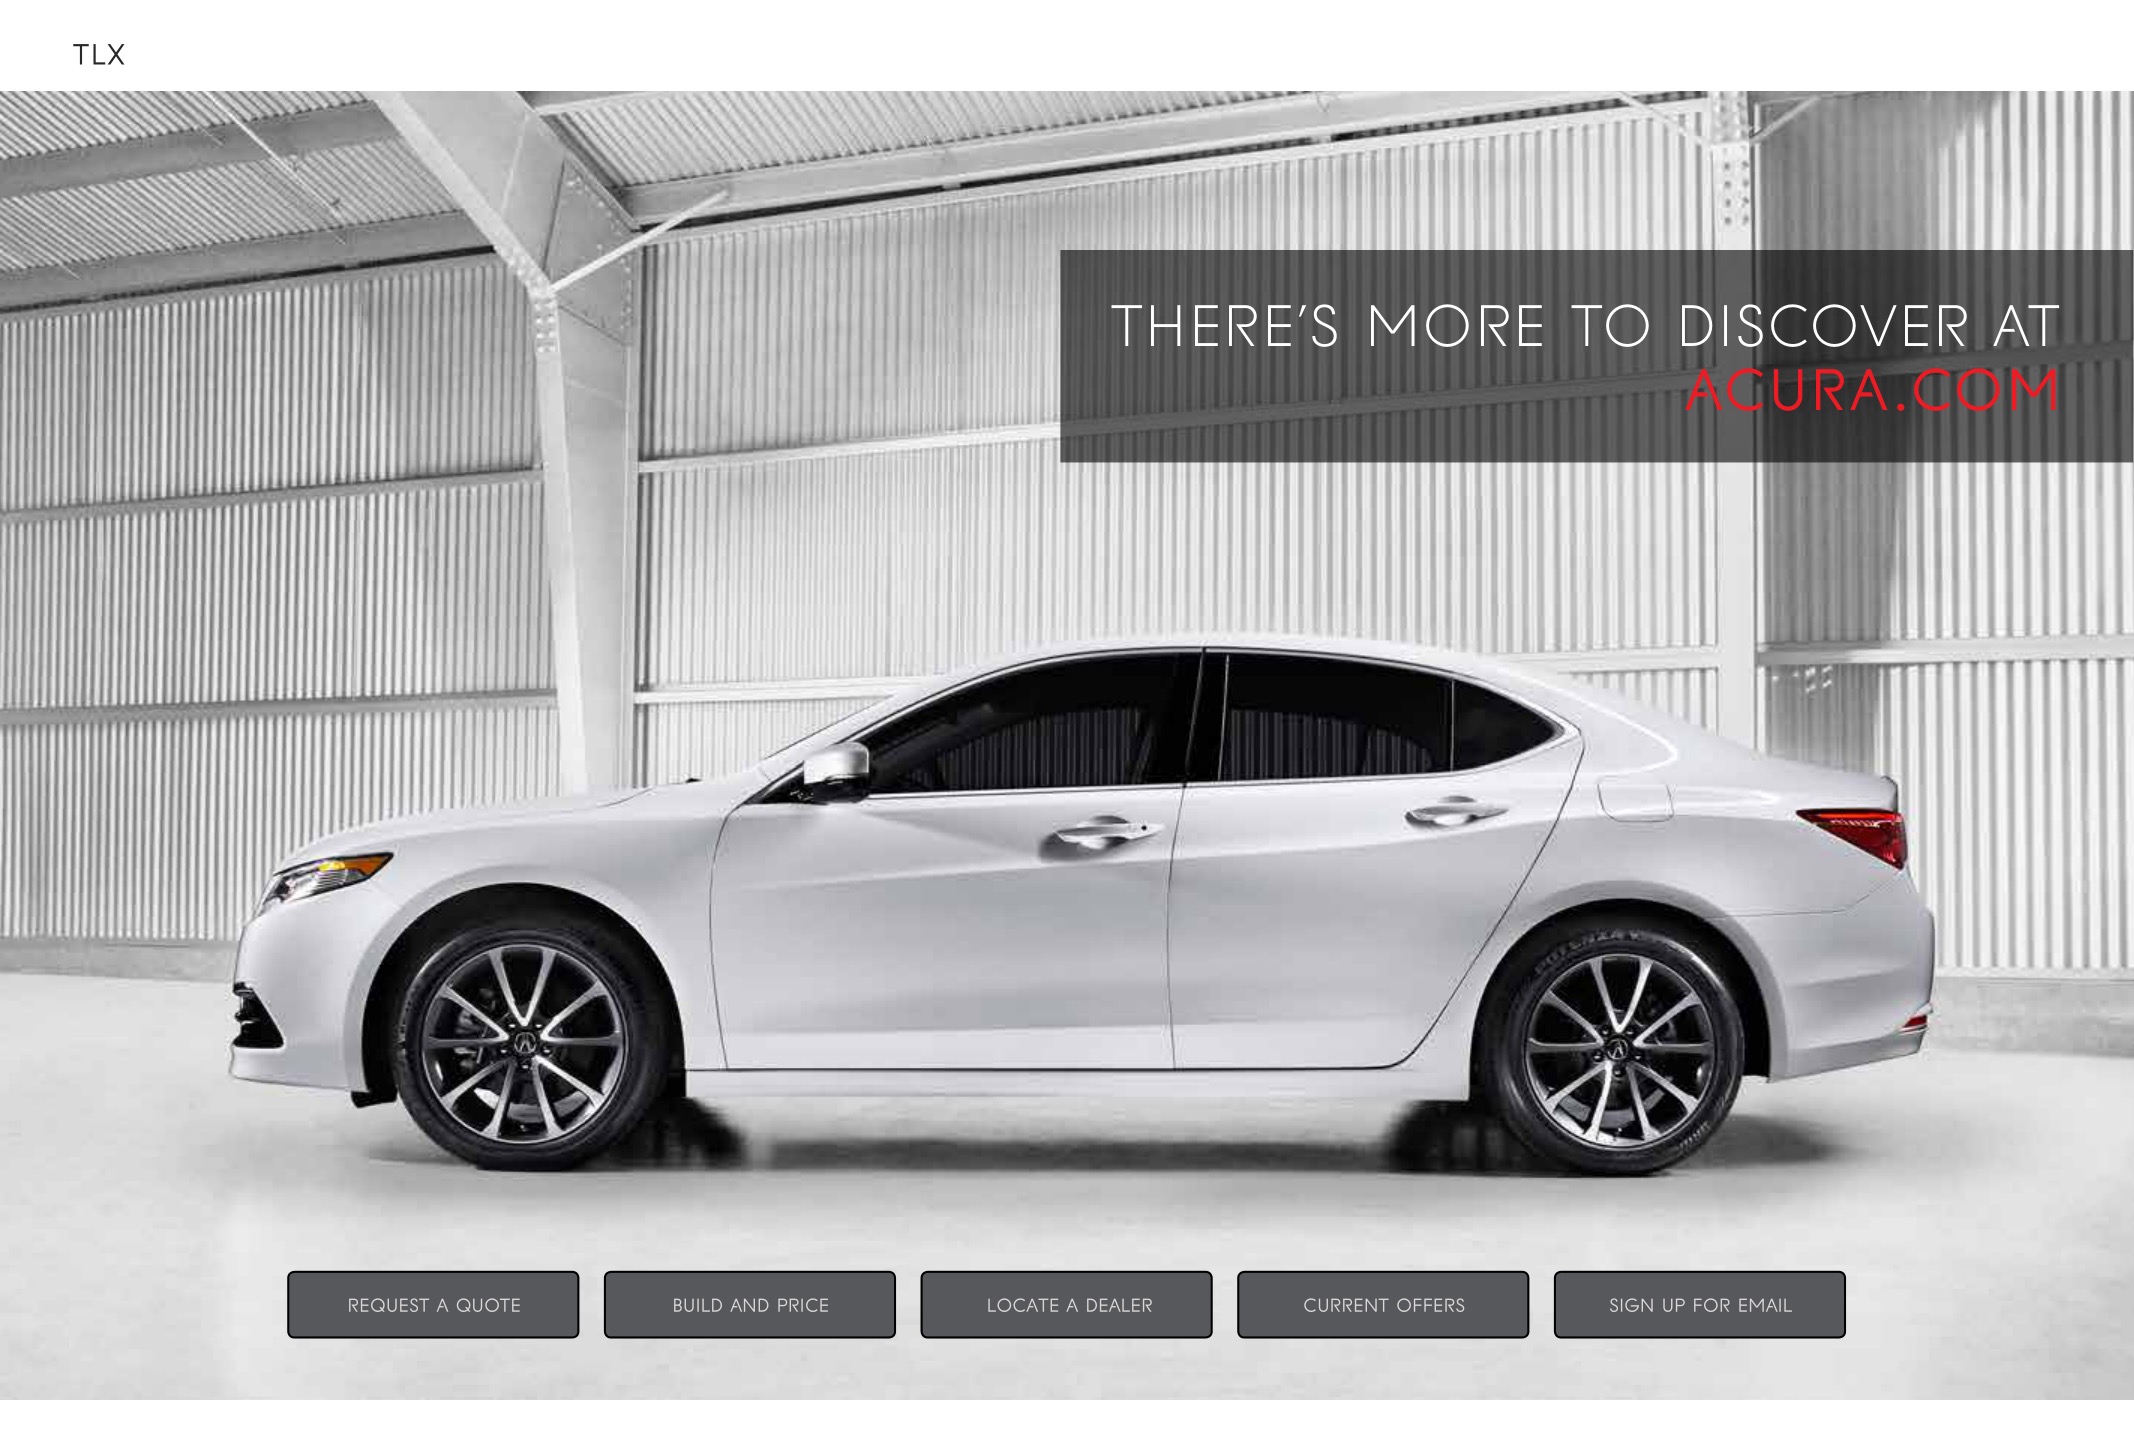 2016 Acura TLX Brochure Page 2